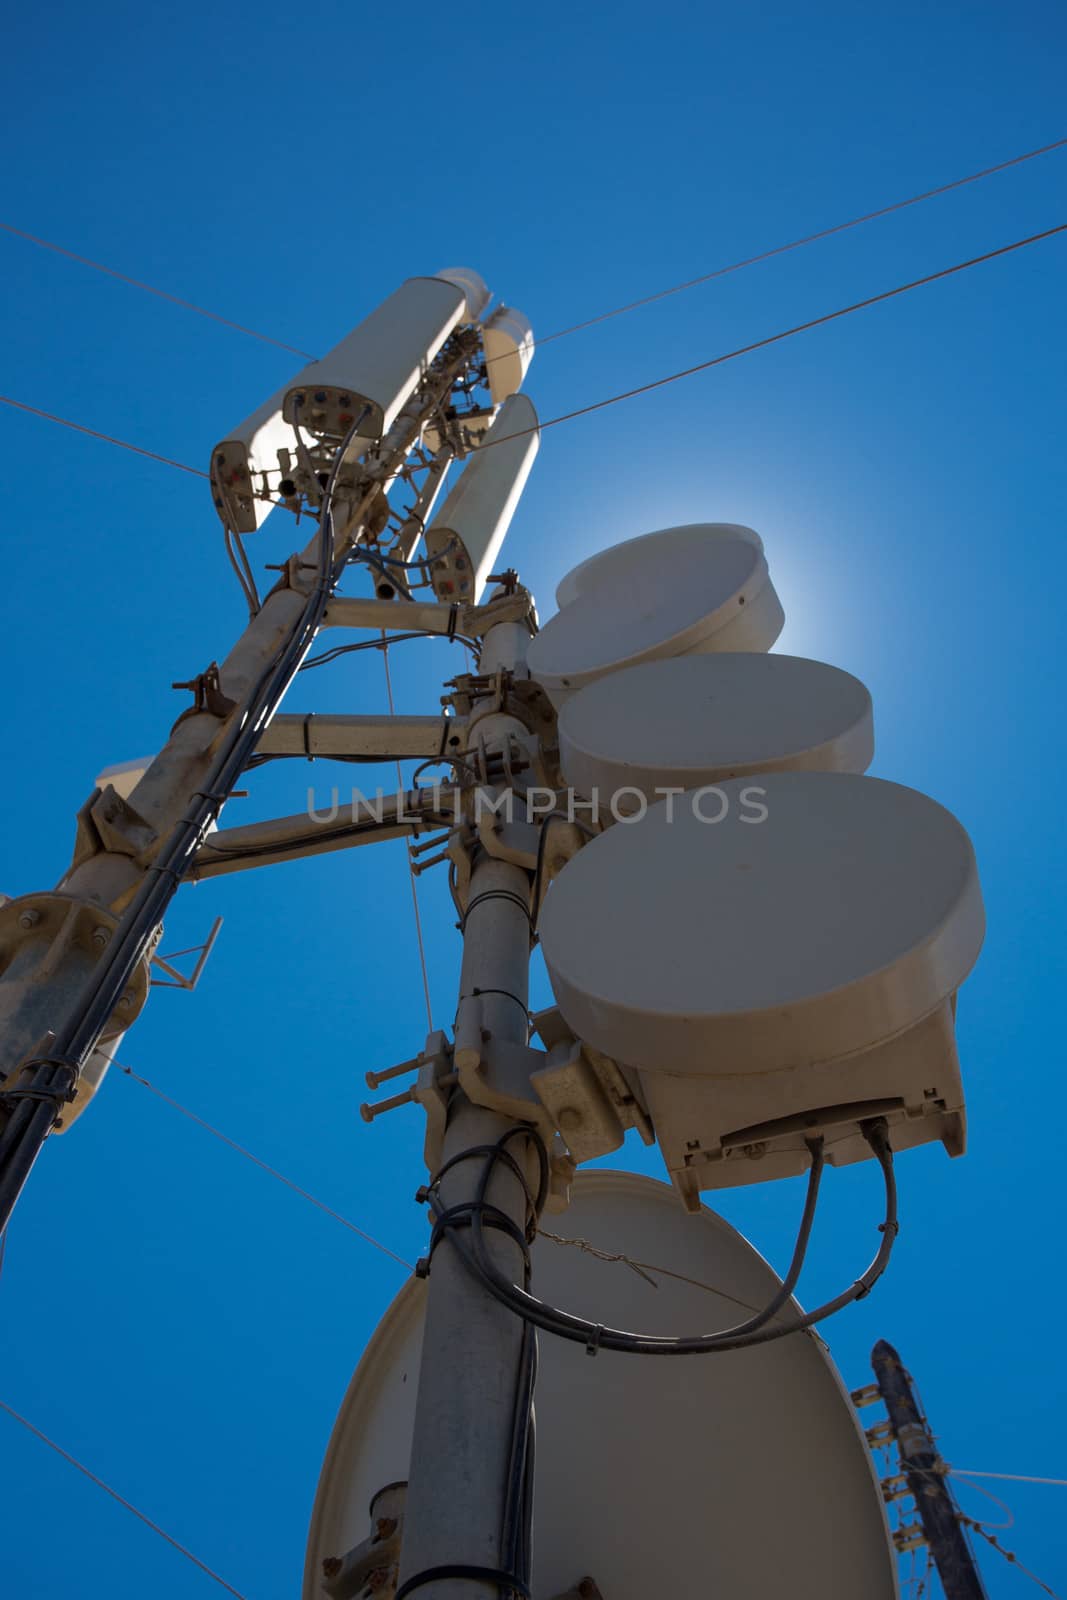 Communication station and equipment and a clear blue sky in Santorini, Greece